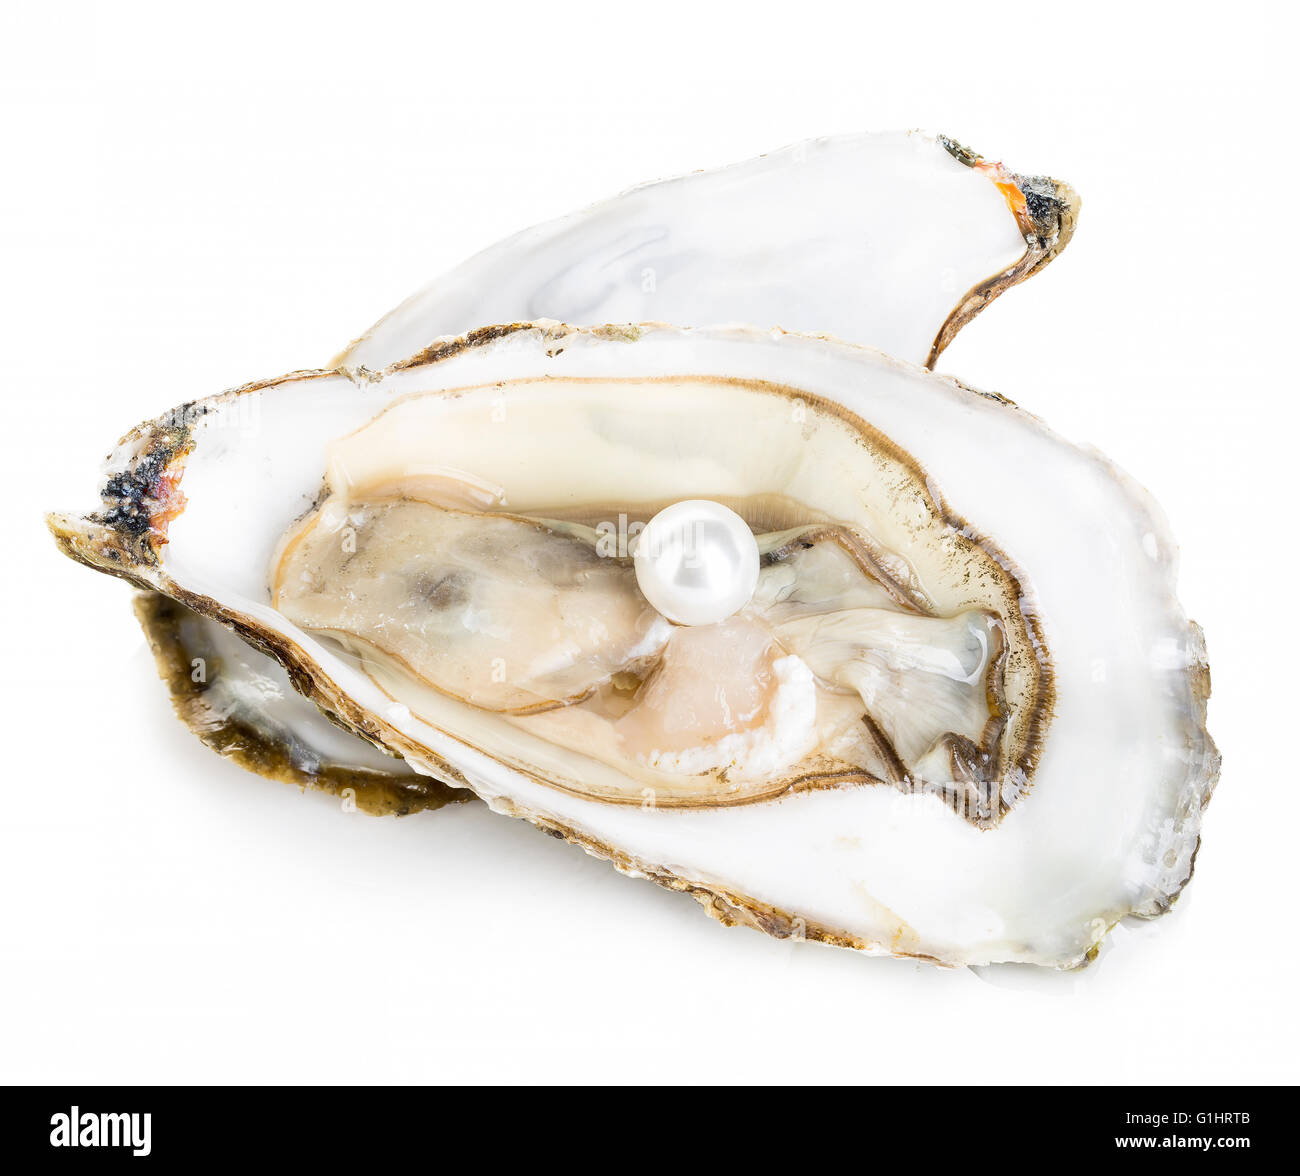 Oyster with pearl close-up isolated on a white background. Stock Photo